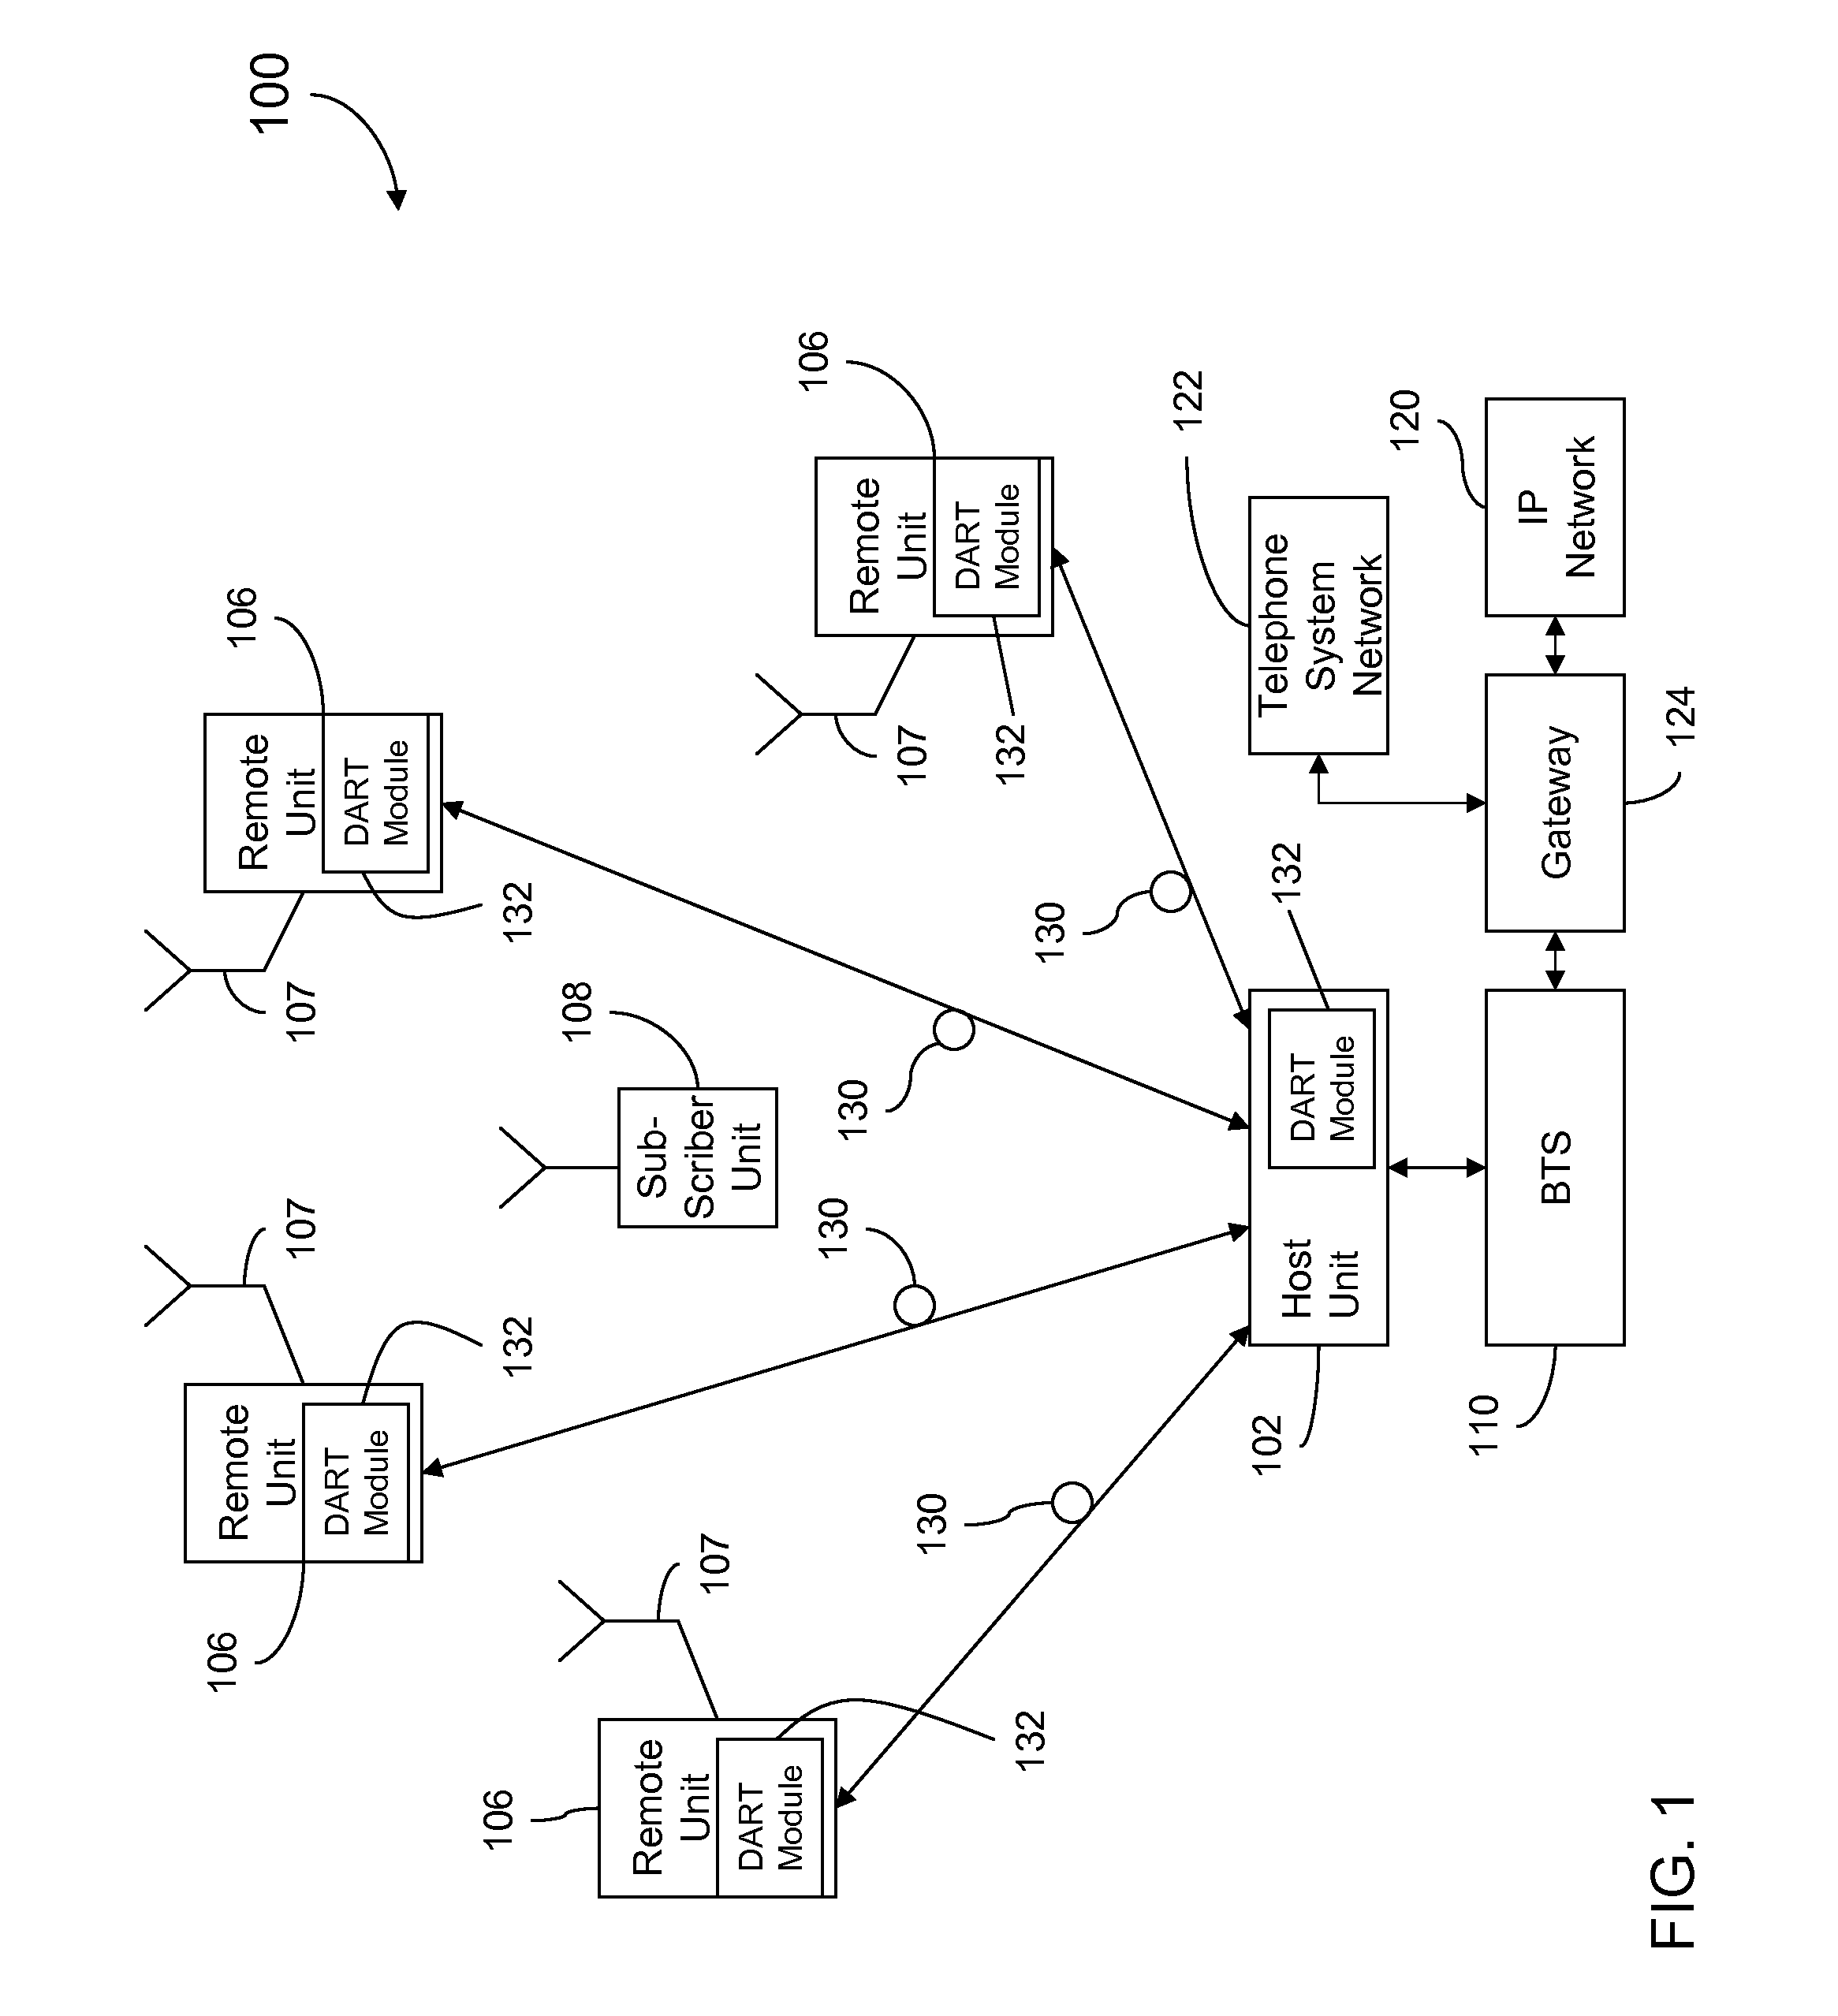 Systems and methods for improved digital RF transport in distributed antenna systems